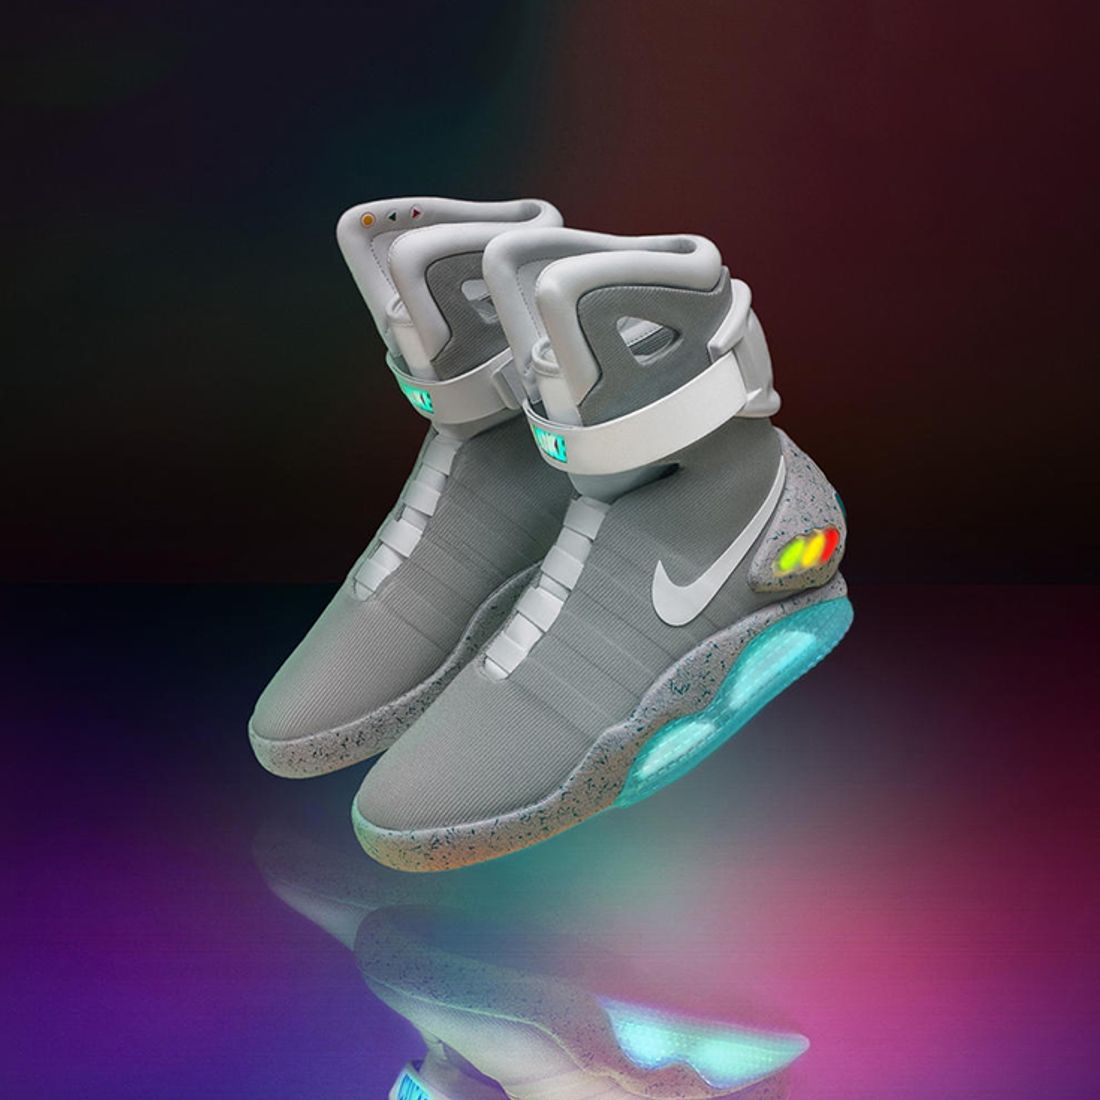 10 Years On: A Look Back at the Nike Air Mag's 2011 Release - Sneaker Freaker